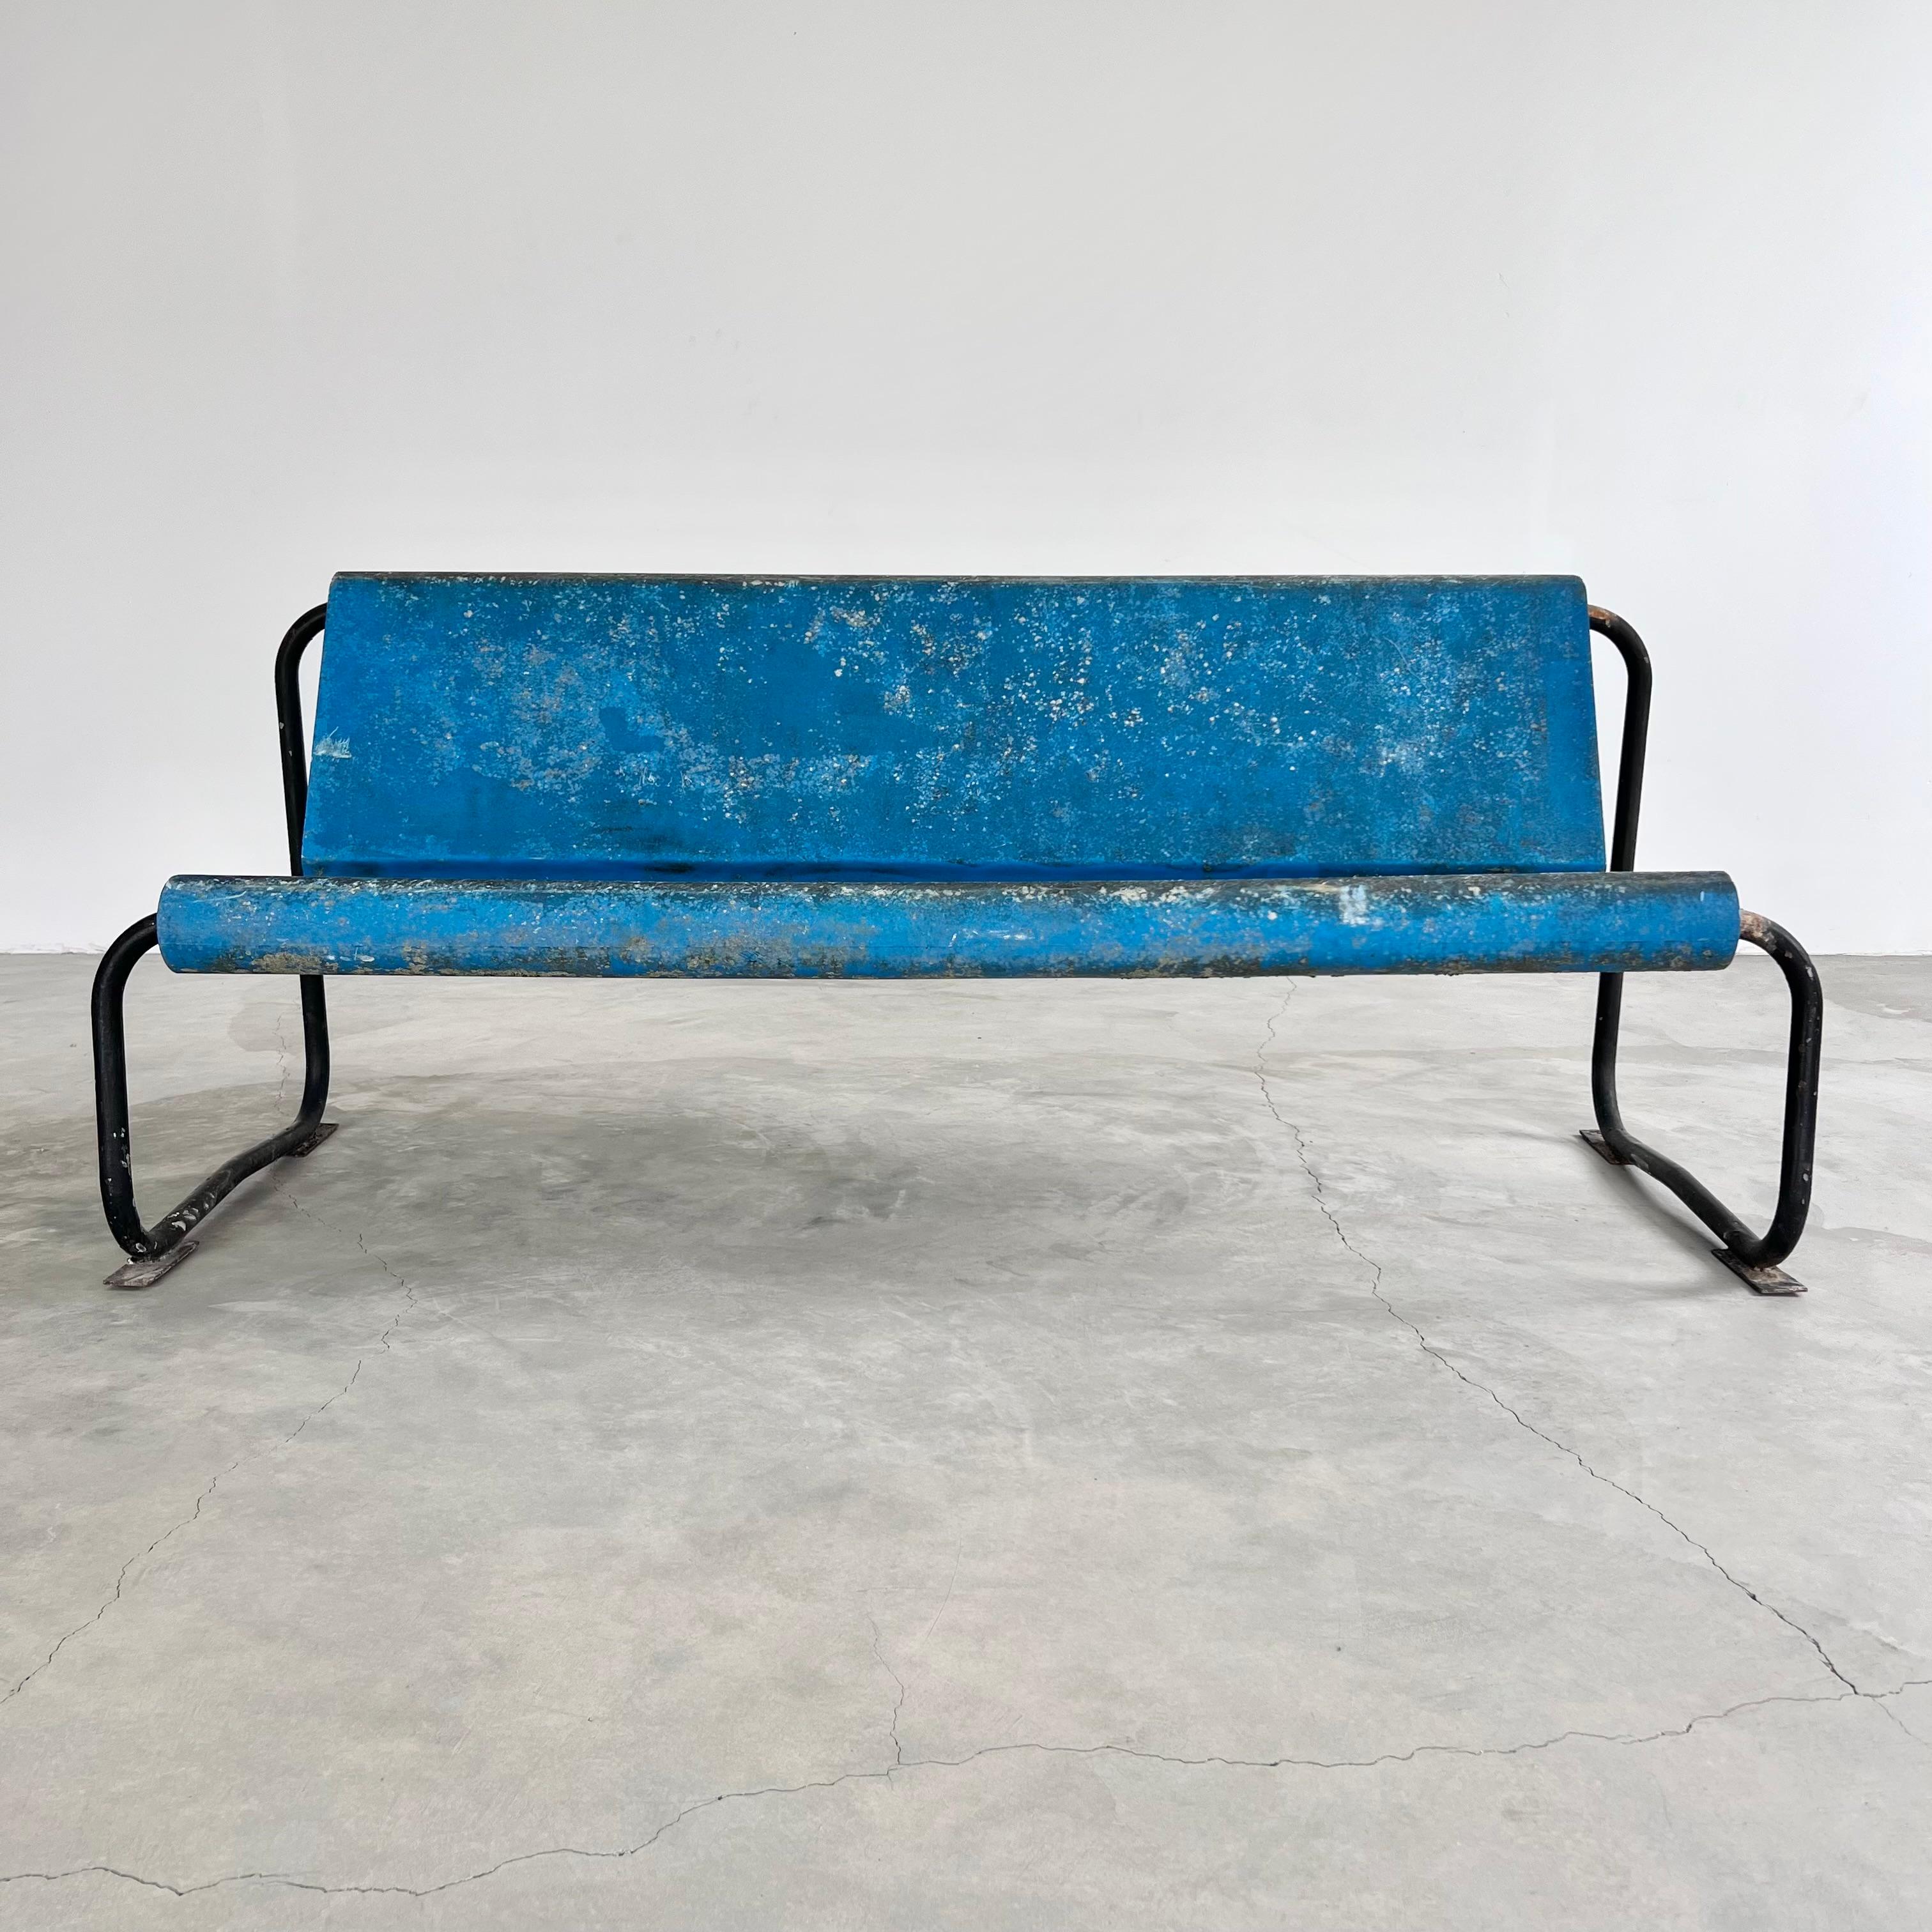 Remarkable midcentury floating bench by Swiss Architect Willy Guhl. circa 1960s. Perfect minimal design as is common with the Swiss designer. Light weight but sturdy. The electric blue seat is made of fiberglass and is suspended by a black tubular